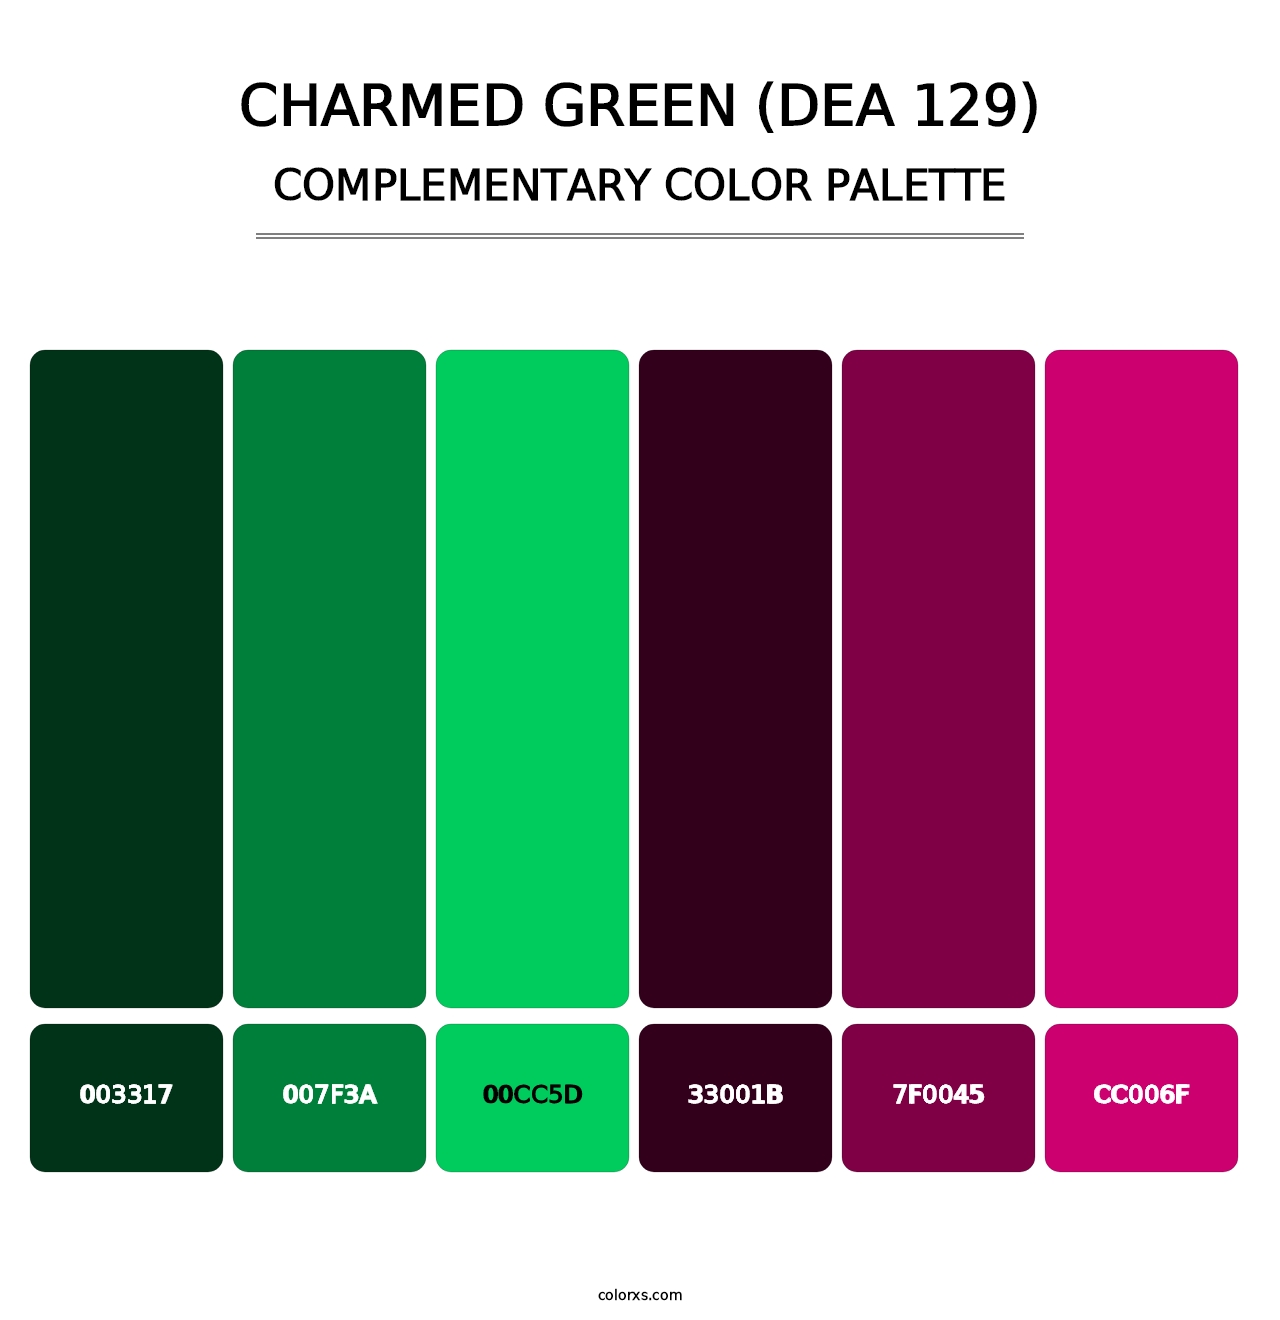 Charmed Green (DEA 129) - Complementary Color Palette